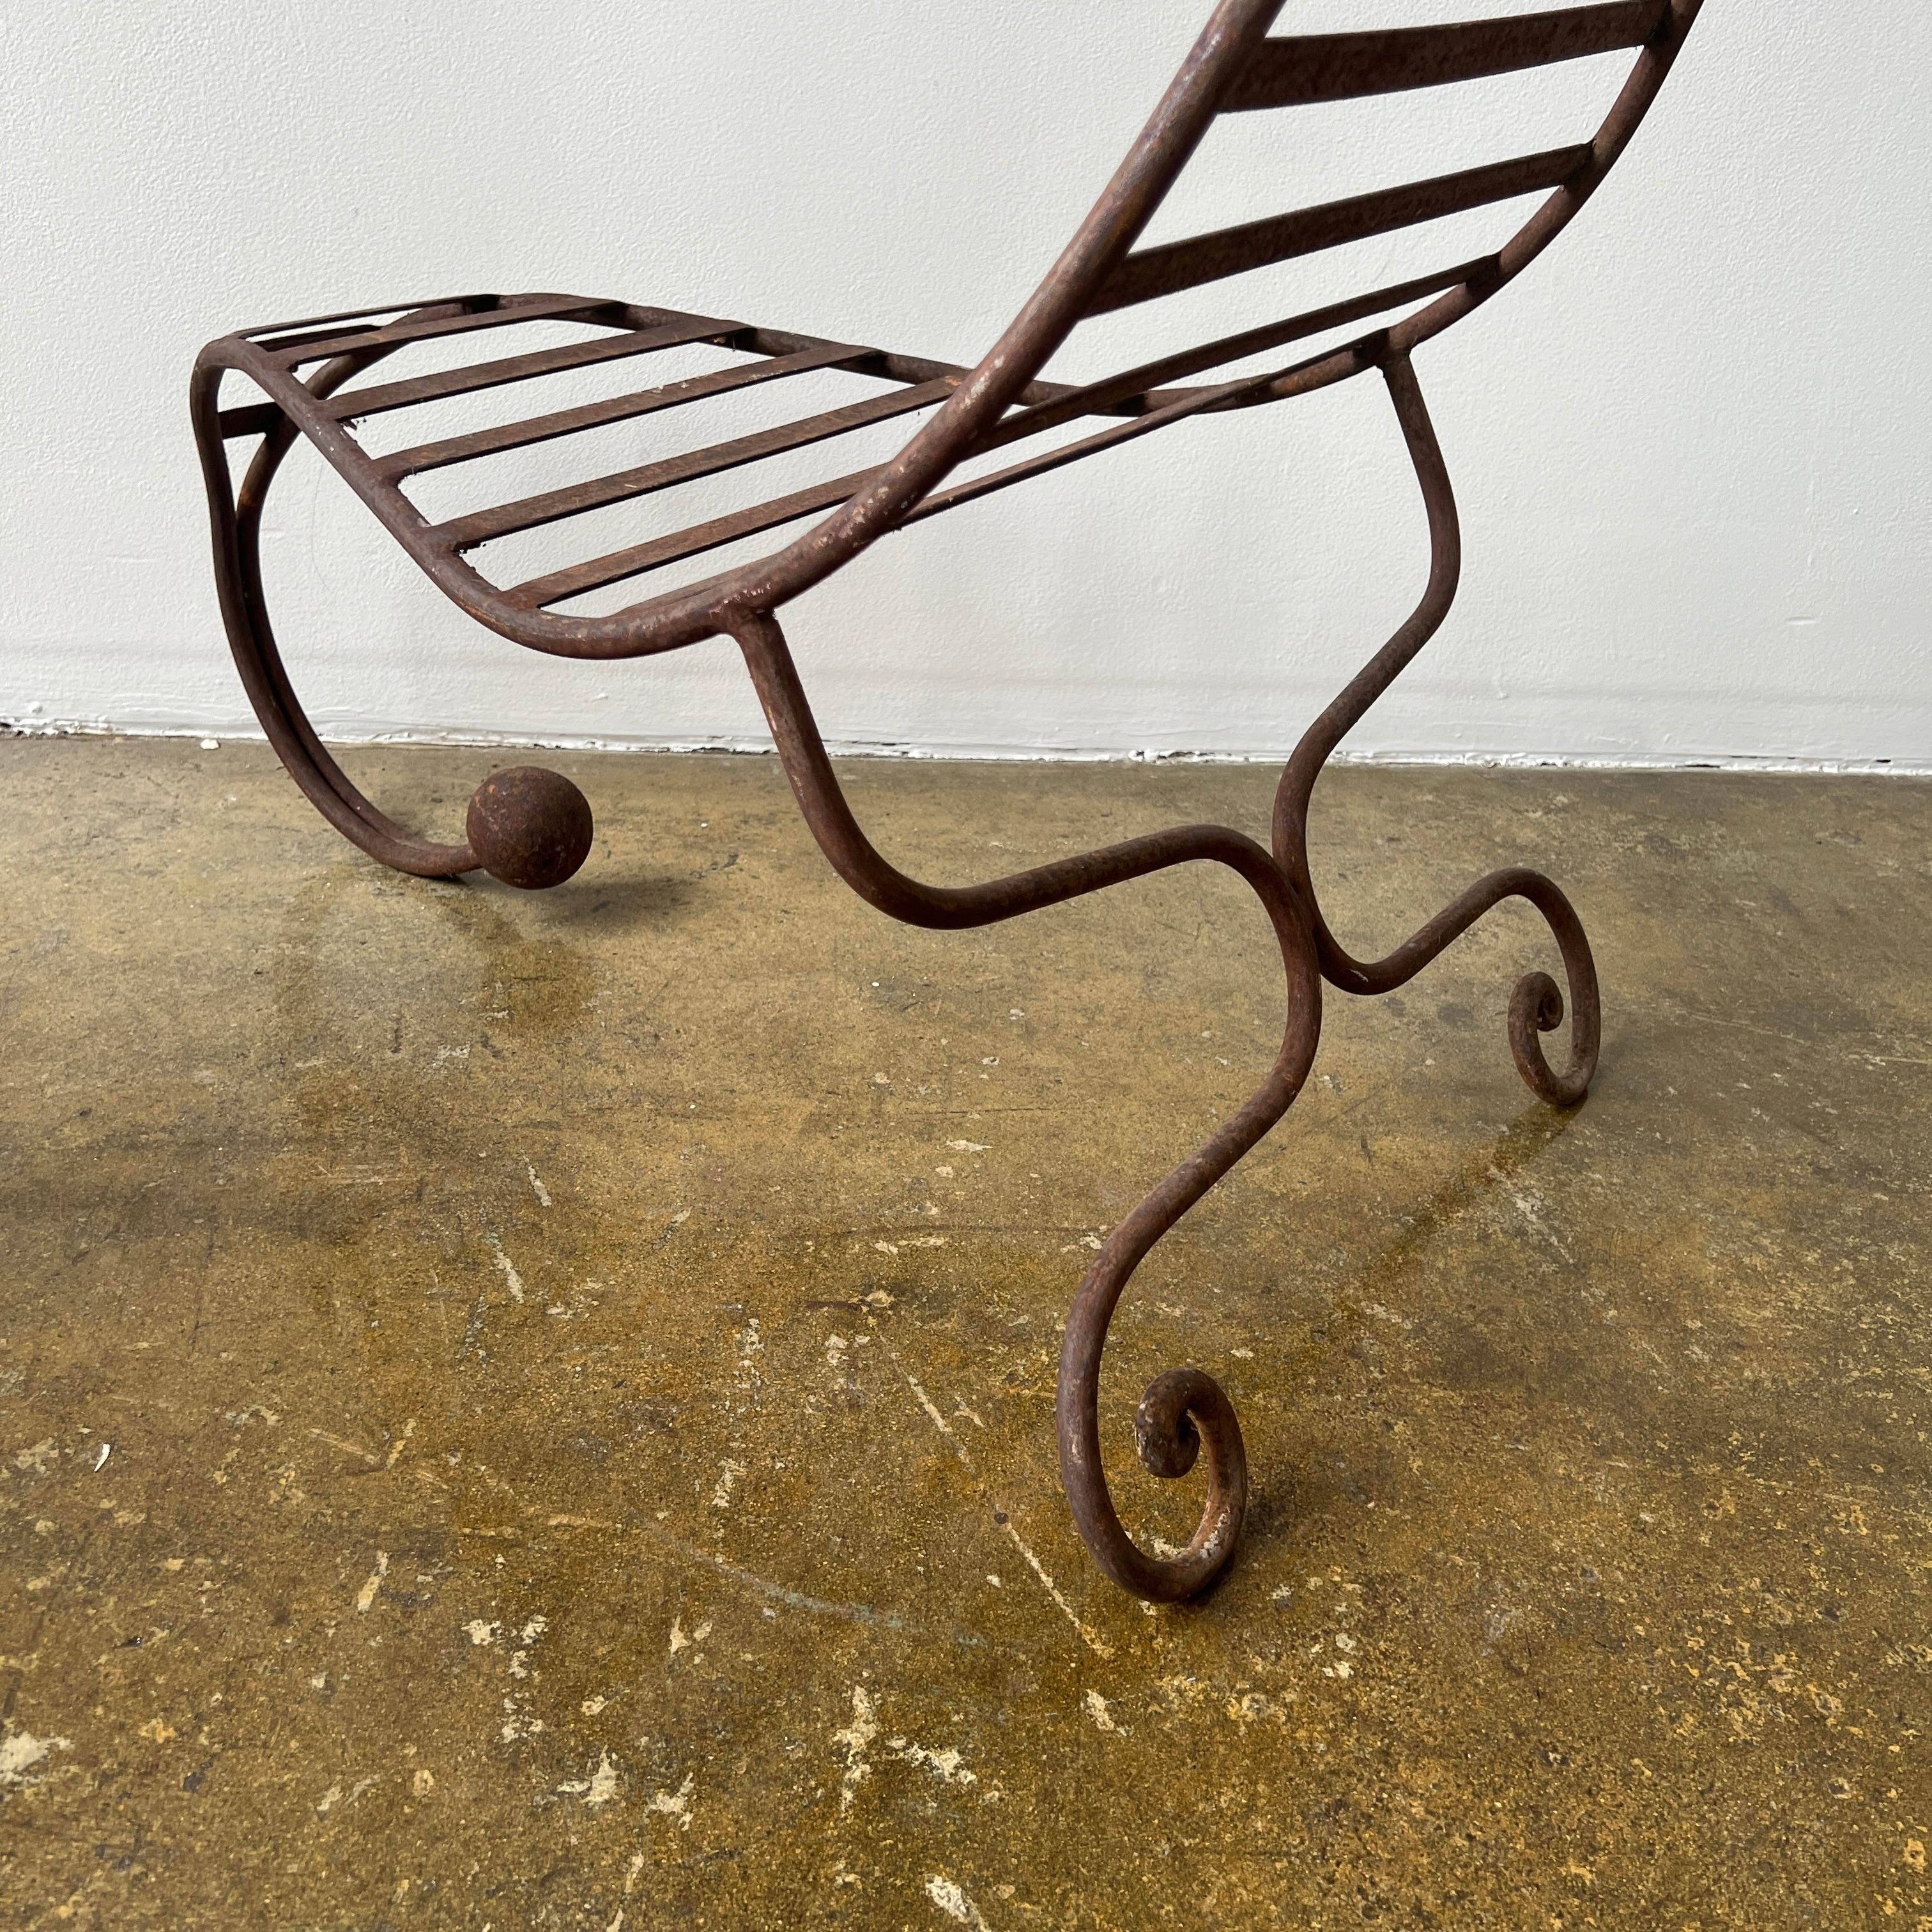 Sculptural Outdoor Iron Chairs 2